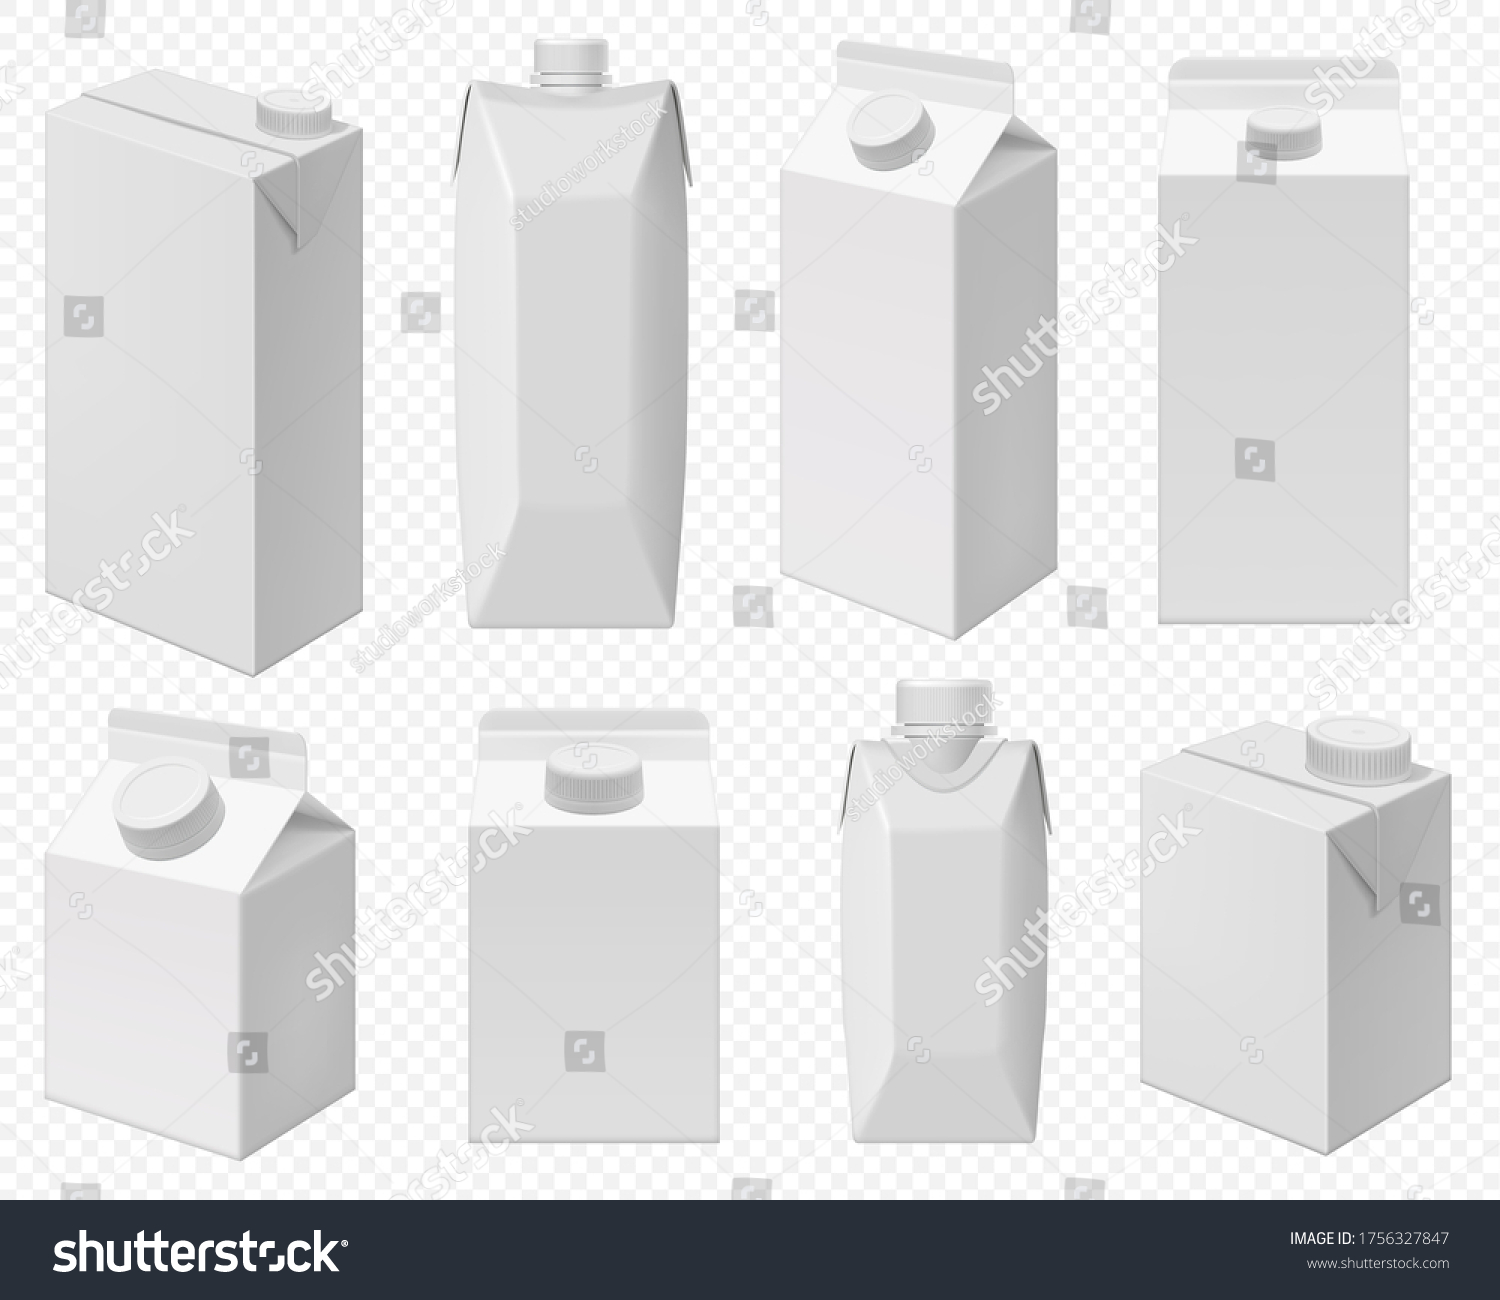 SVG of Milk and juice pack. Realistic carton package isolated, white box template for dairy product. Blank packaging for milk or juice on transparent background. svg